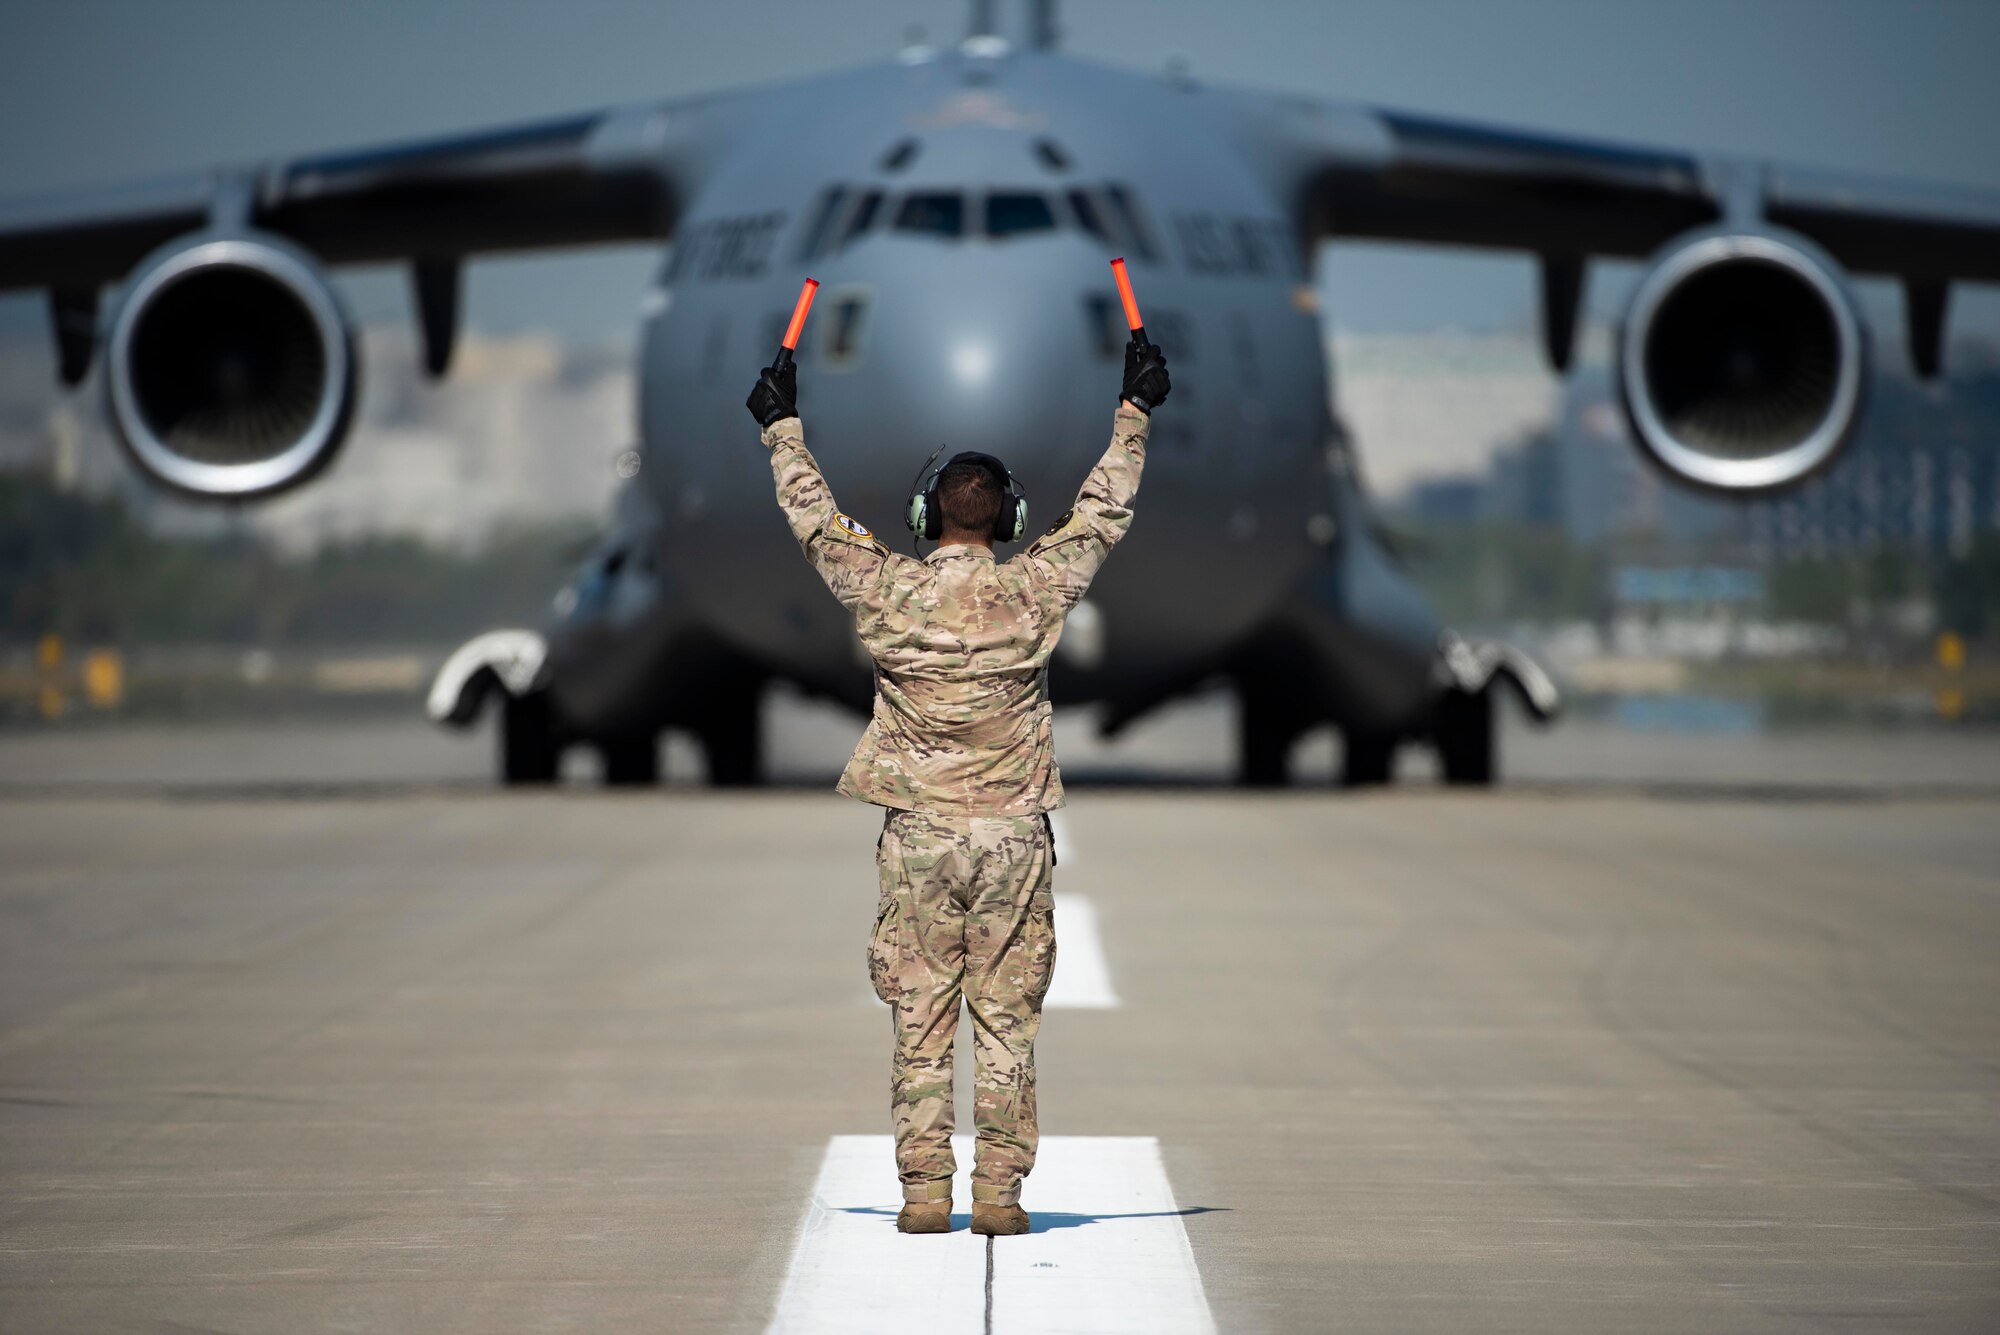 A U.S. Air Force Airman, assigned to the 535th Airlift Squadron based at Joint Base Pearl-Harbor Hickam, Hawaii, marshalls a C-17 Globemaster III at Seoul Air Base, Republic of Korea, following an aerial demonstration as part of the Seoul International Aerospace and Defense Exhibition 2021, Oct. 18. During the 5-day ADEX, attendees can experience aerial and ground demonstrations, learn about a variety of aerospace and defense technologies during daily seminars, and view a multitude of U.S. and ROK static displays. (U.S. Air Force photo by Staff Sgt. Gabrielle Spalding)